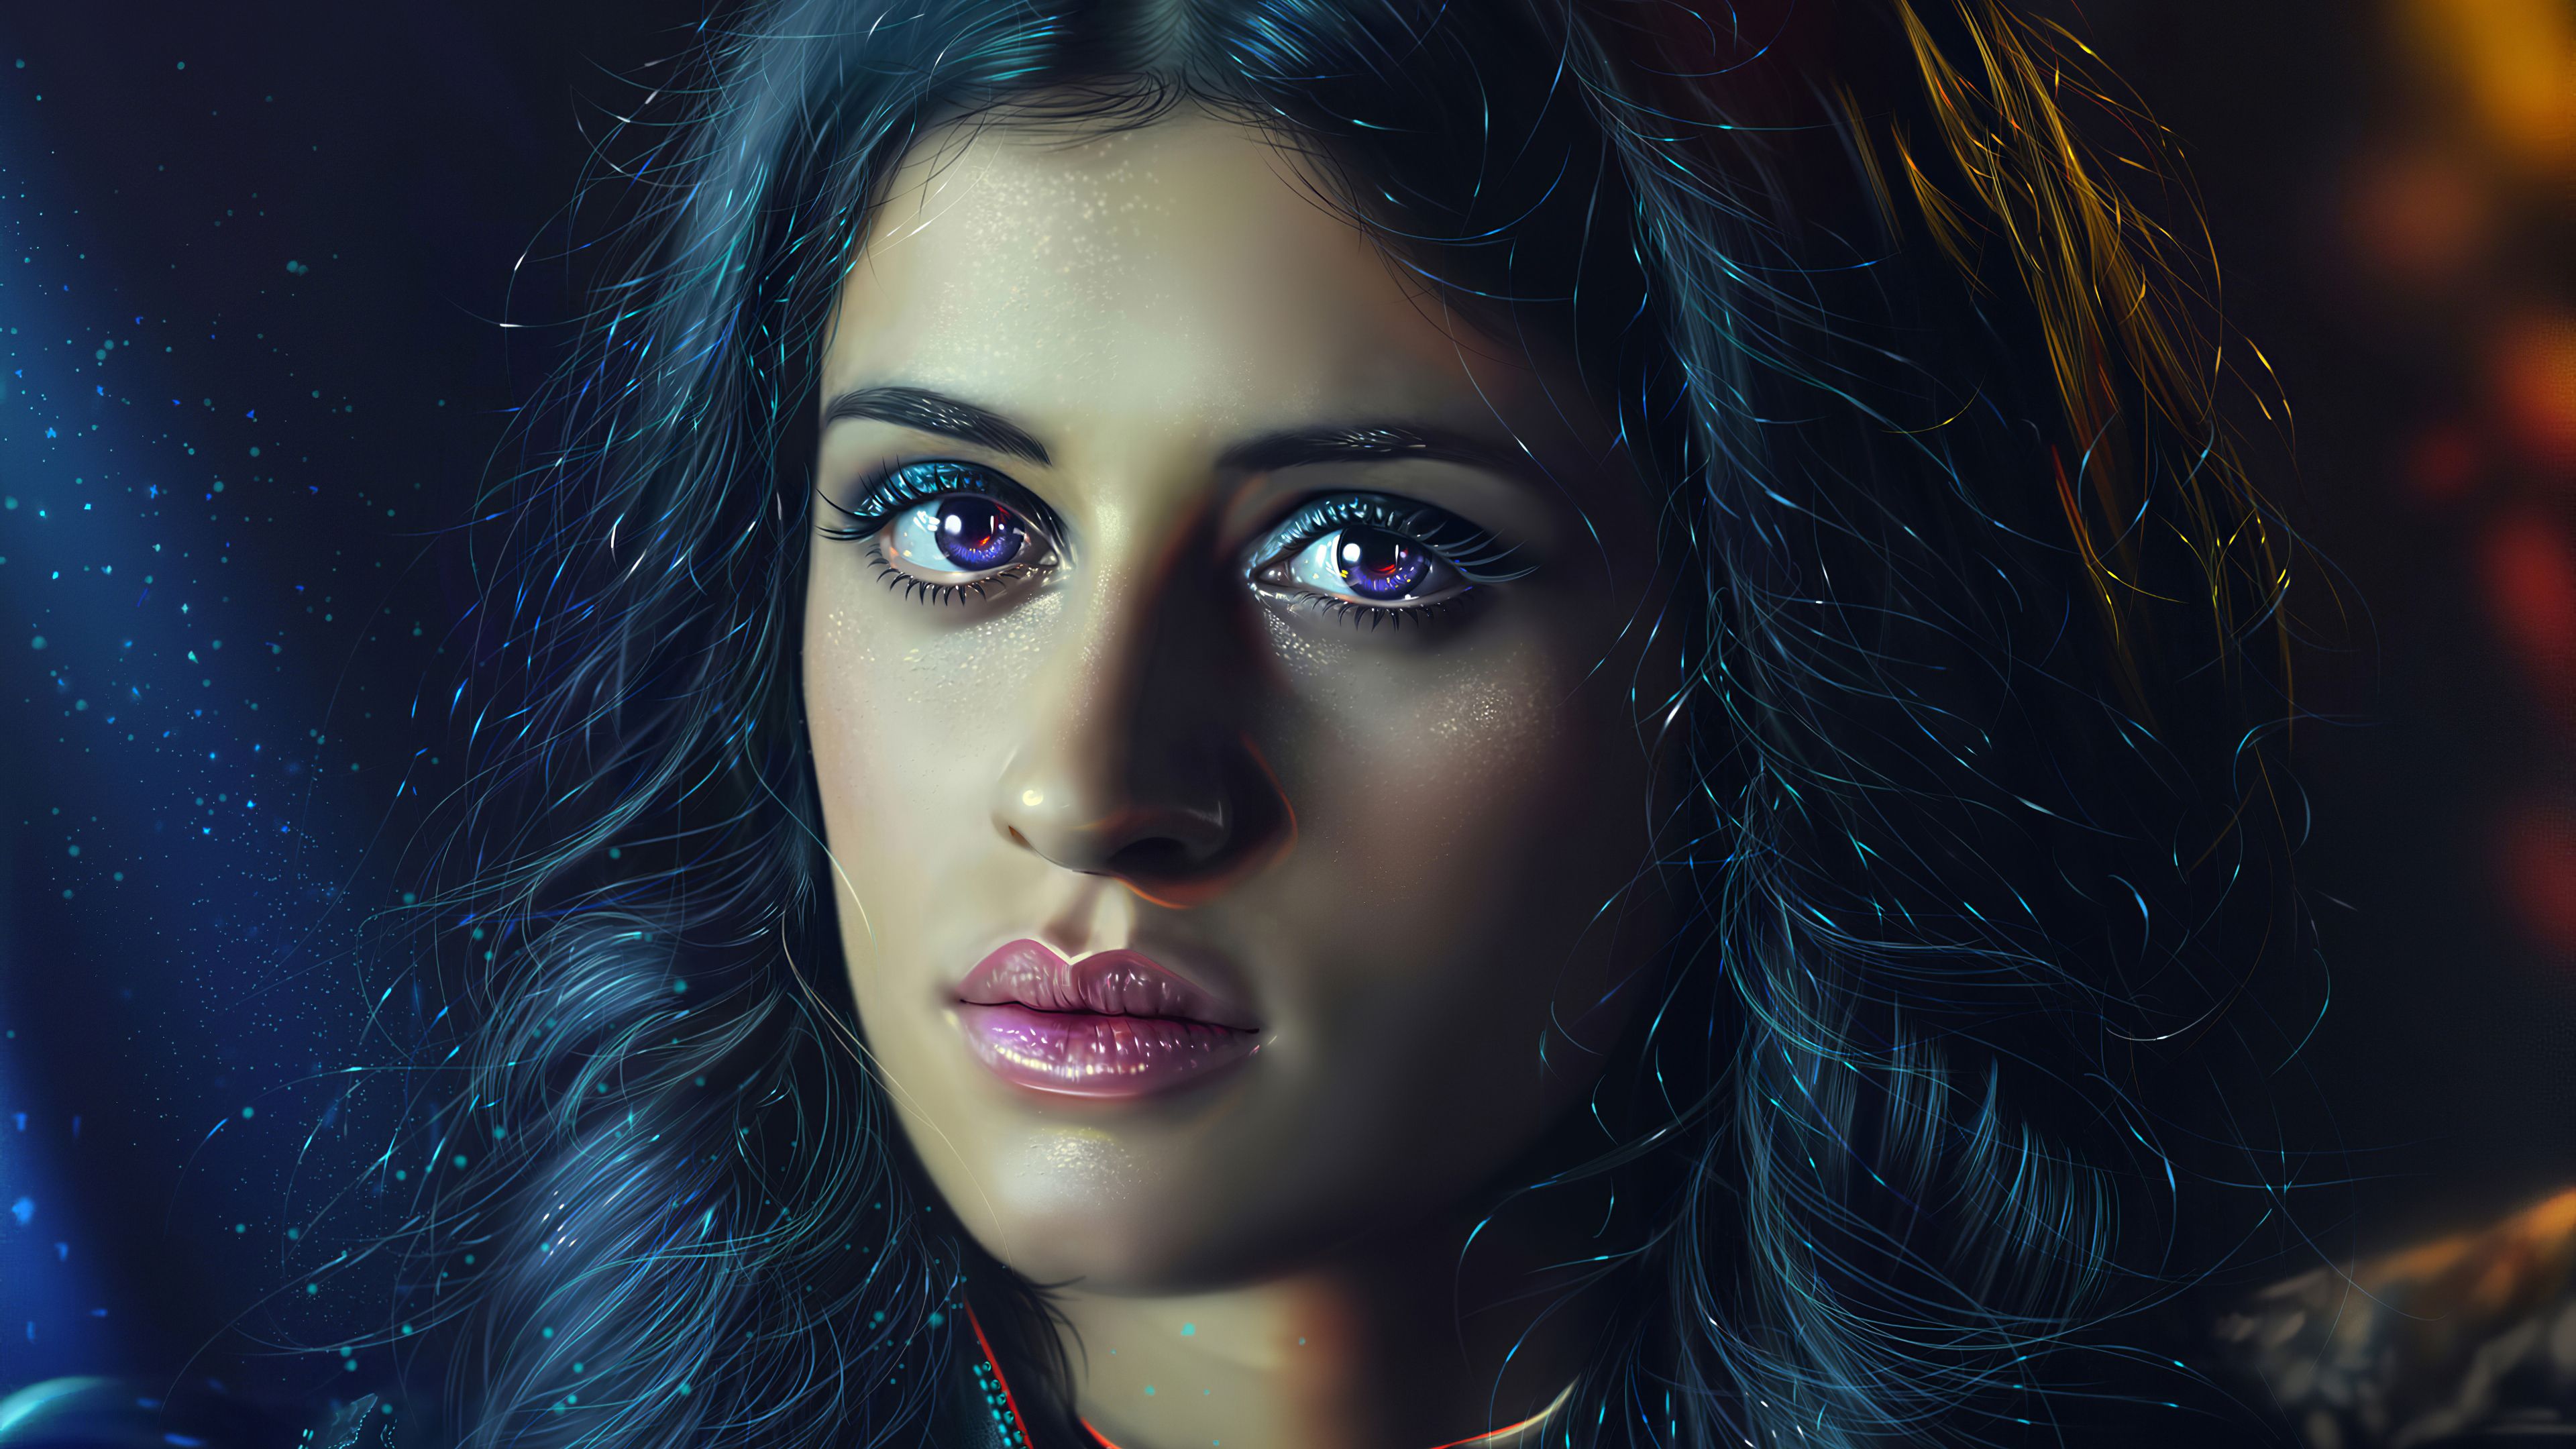 Anya Chalotra As Yennefer In Witcher Art, HD Tv Shows, 4k Wallpaper, Image, Background, Photo and Picture